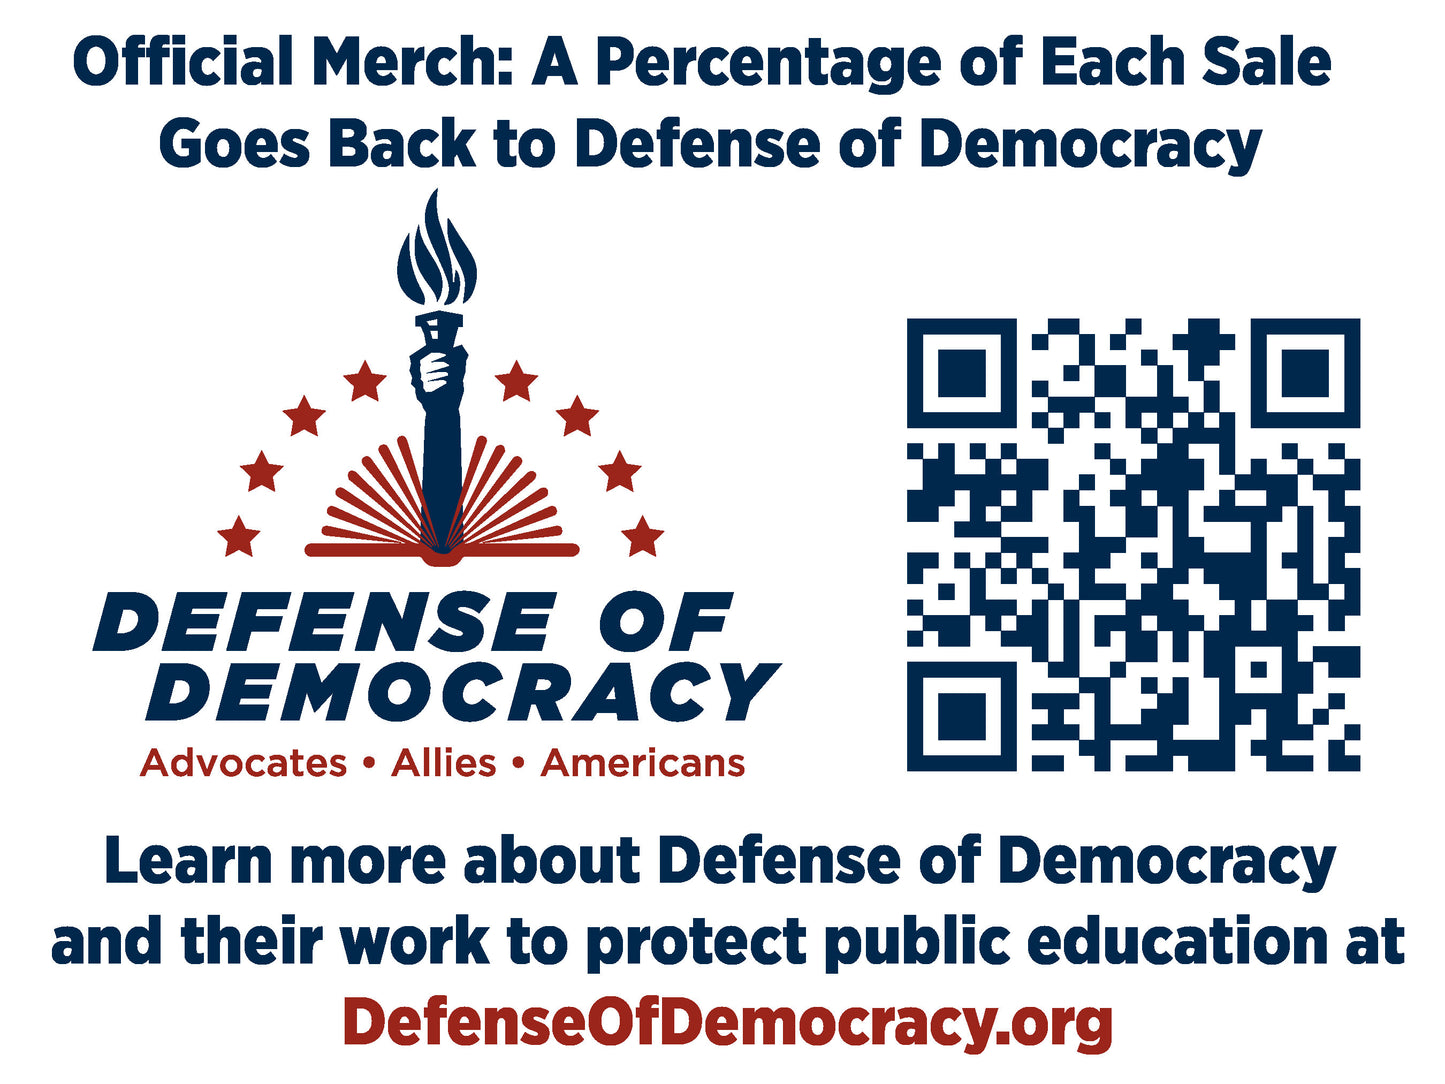 Veterans Defending Democracy Patches - 3" Iron-On or Sew On Sublimated patches with black border  - Official Merch for Defense of Democracy